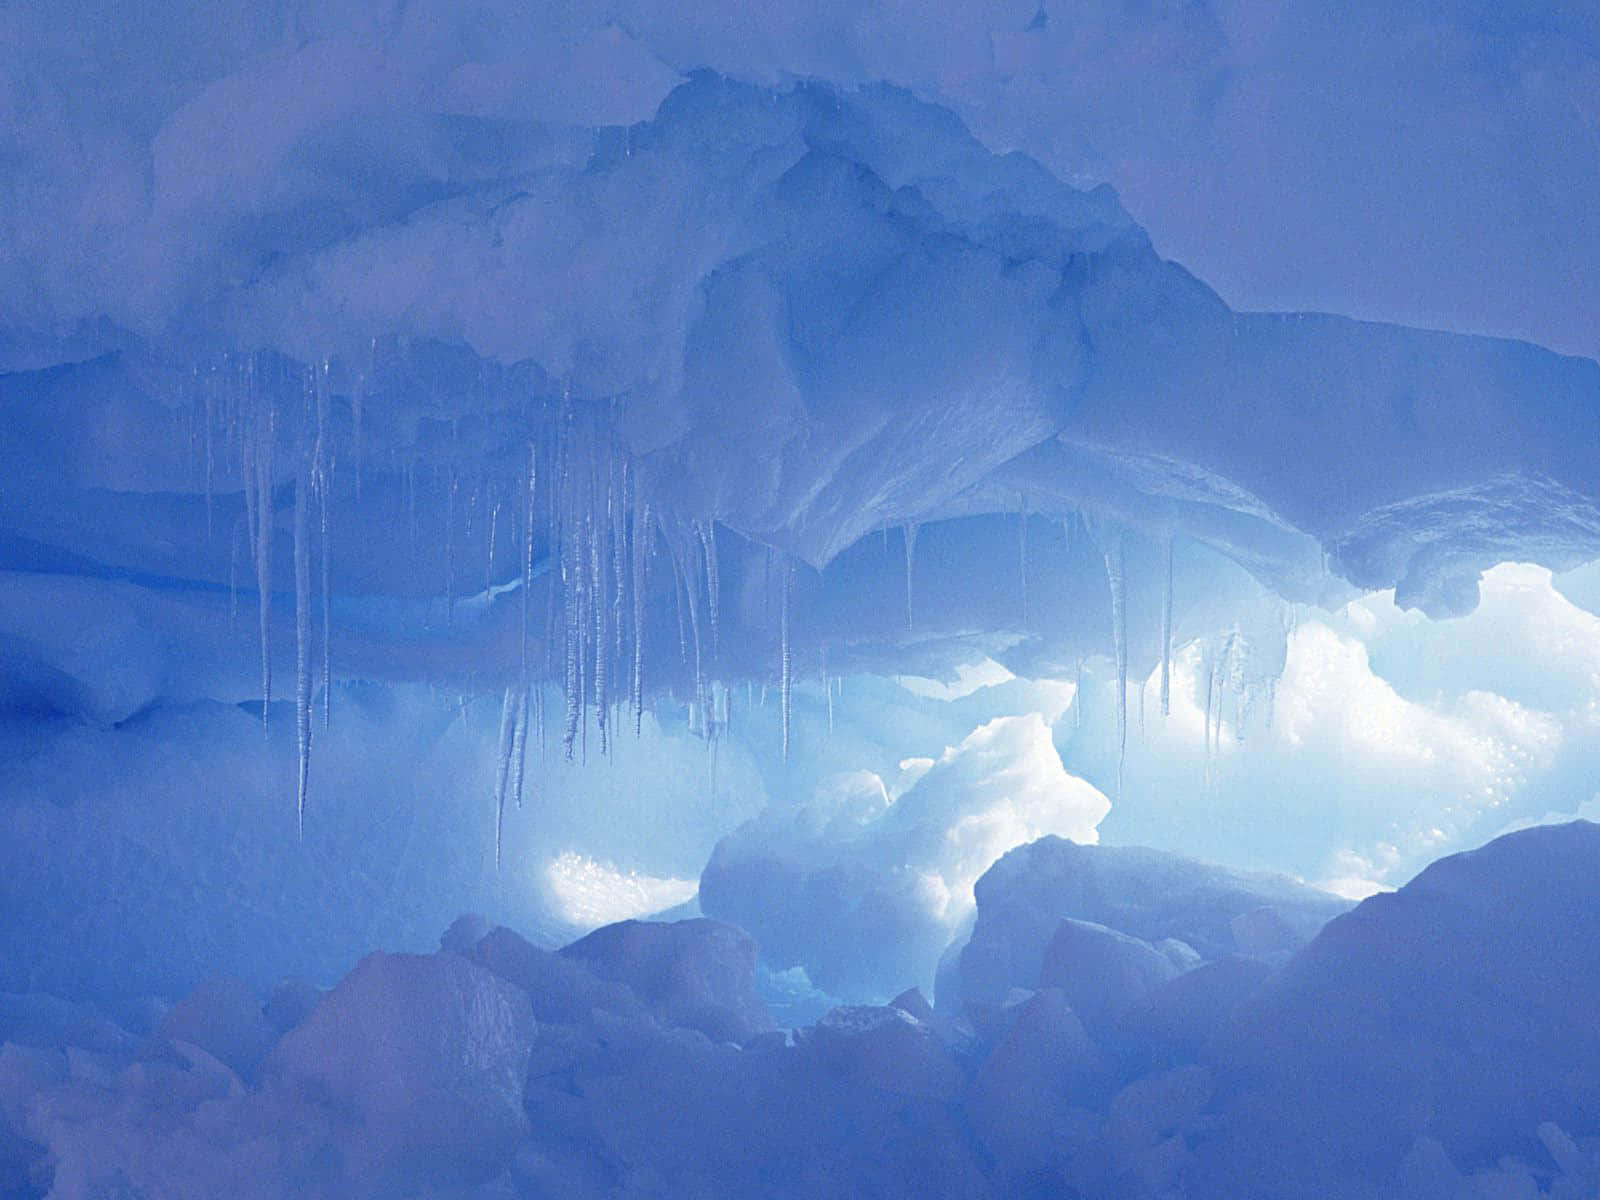 A beautiful still of angelic snow-covered ice